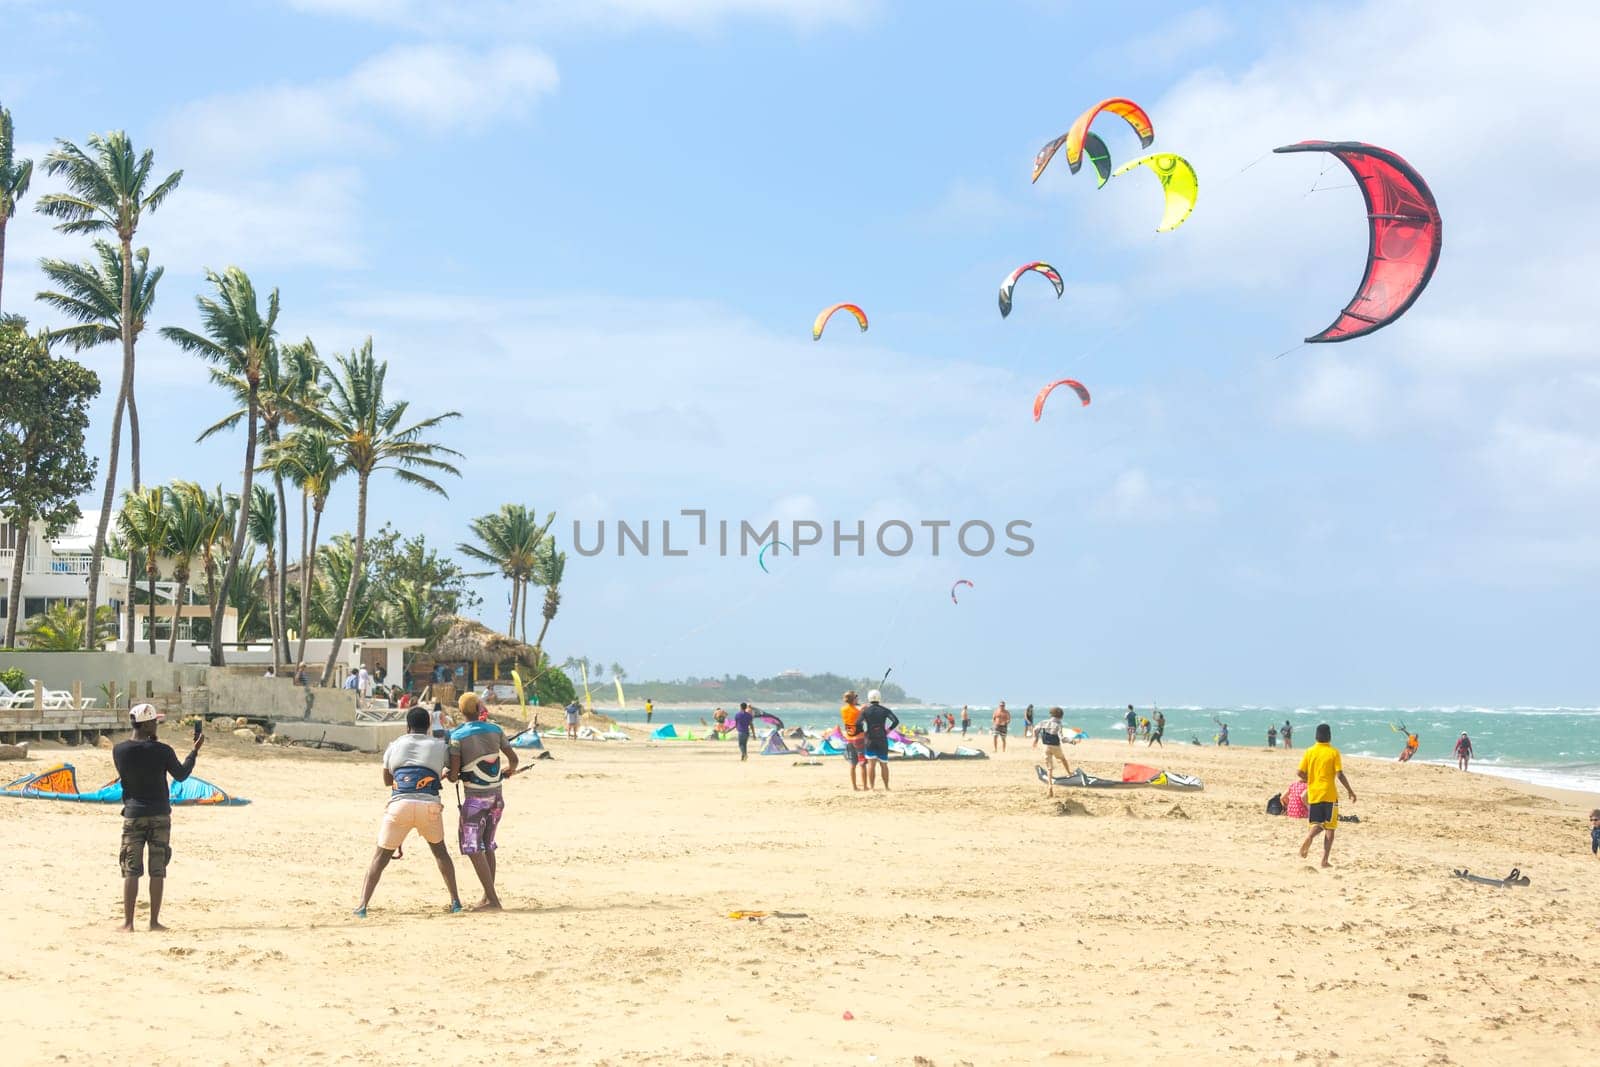 Crowd of active sporty people enjoying kitesurfing holidays and activities on perfect sunny day on Cabarete tropical sandy beach in Dominican Republic. by kasto